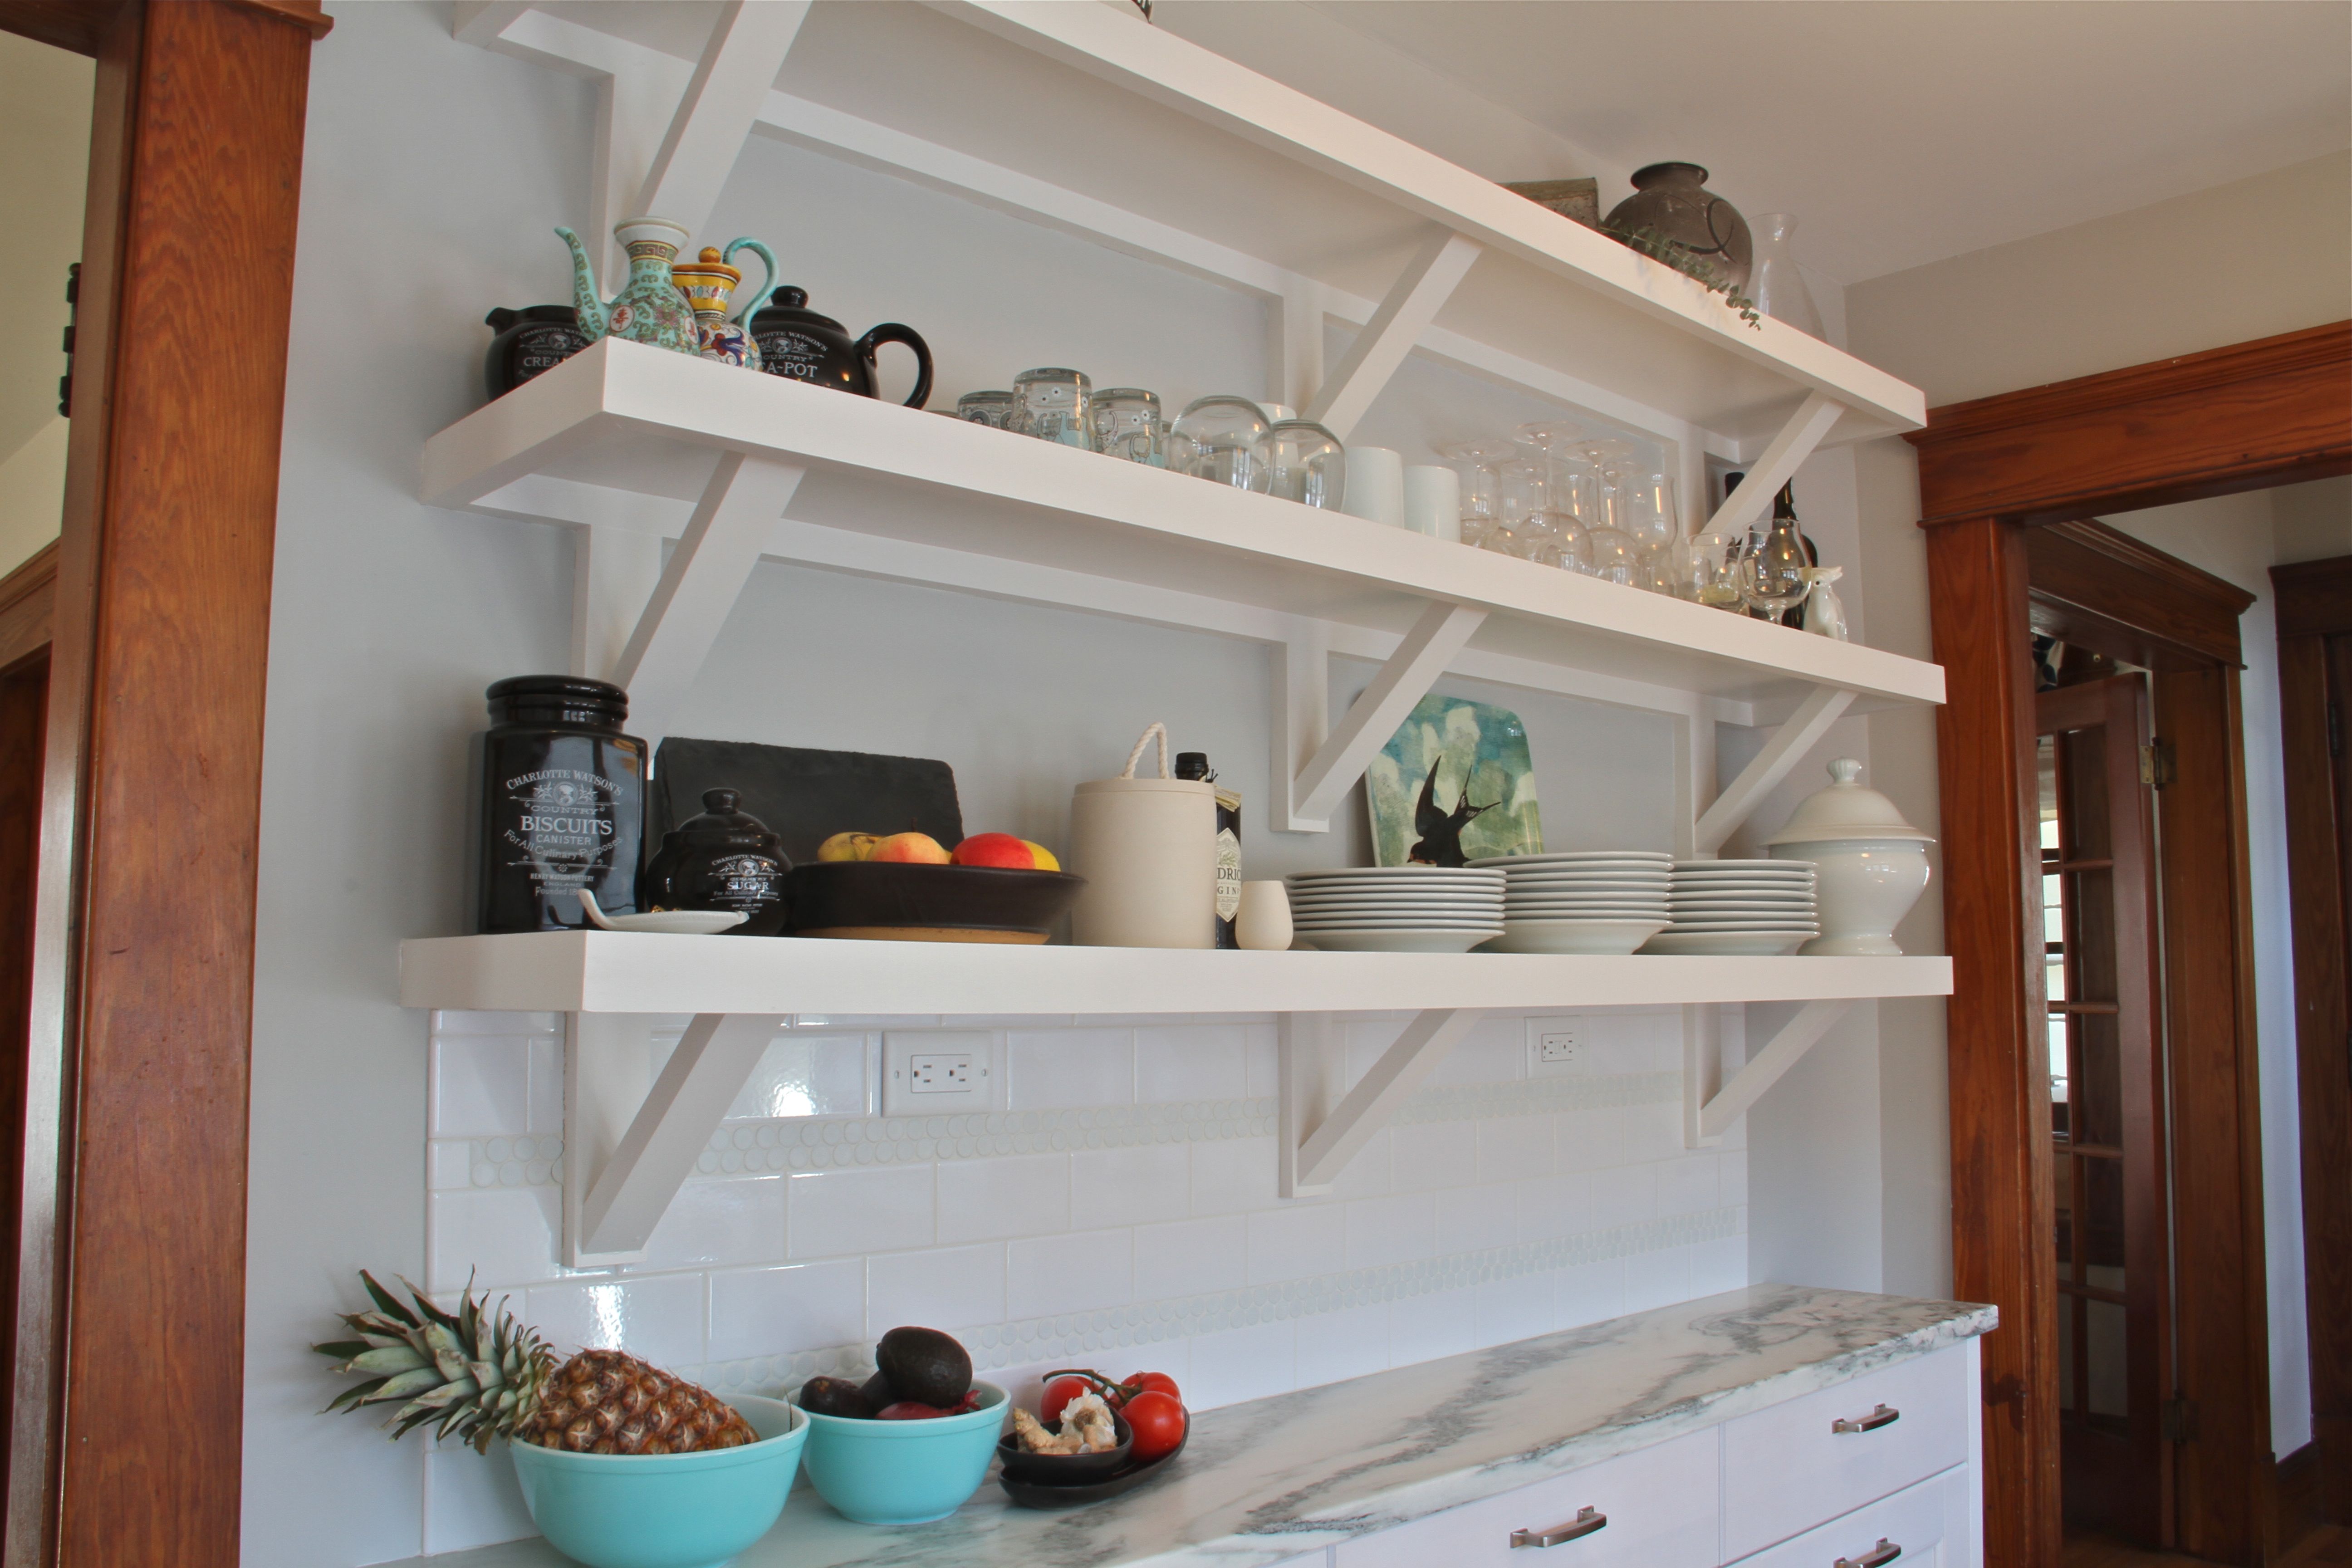 AFTER: The shelves AND the lower cabinets are about a foot deep, giving ample counterspace for a buffet, and ample upper-reach storage, while keeping the aisle open and easy to move through.